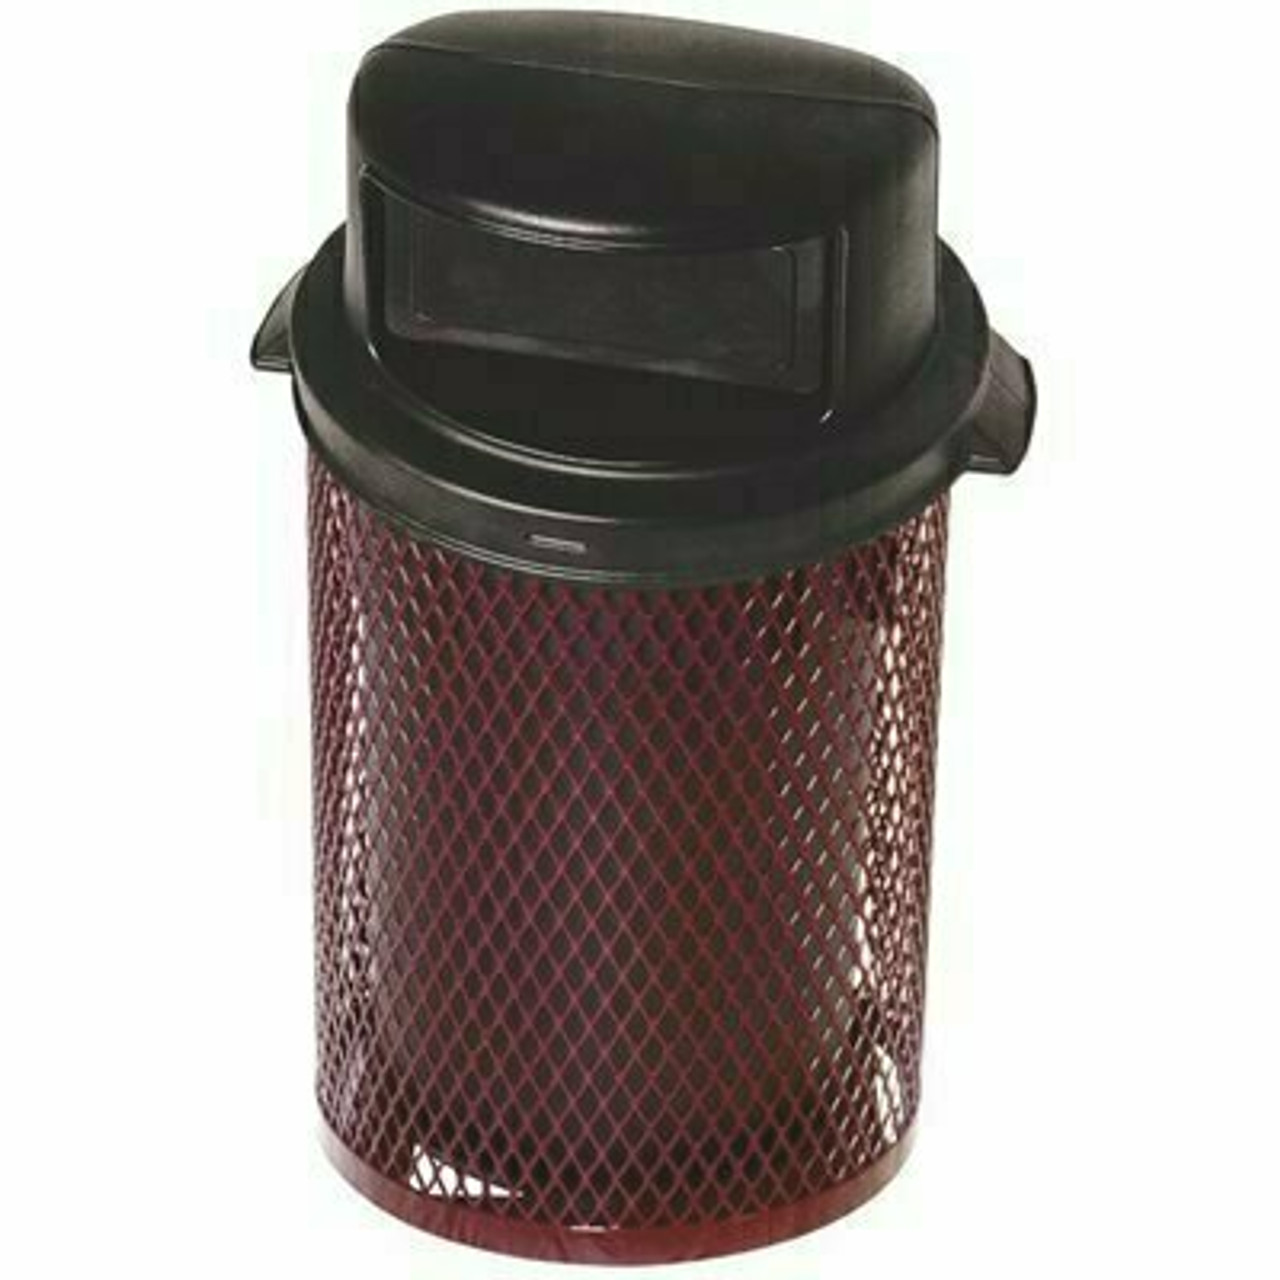 Everest 55 Gal. Burgundy Trash Receptacle With Square Plastic Dome Top